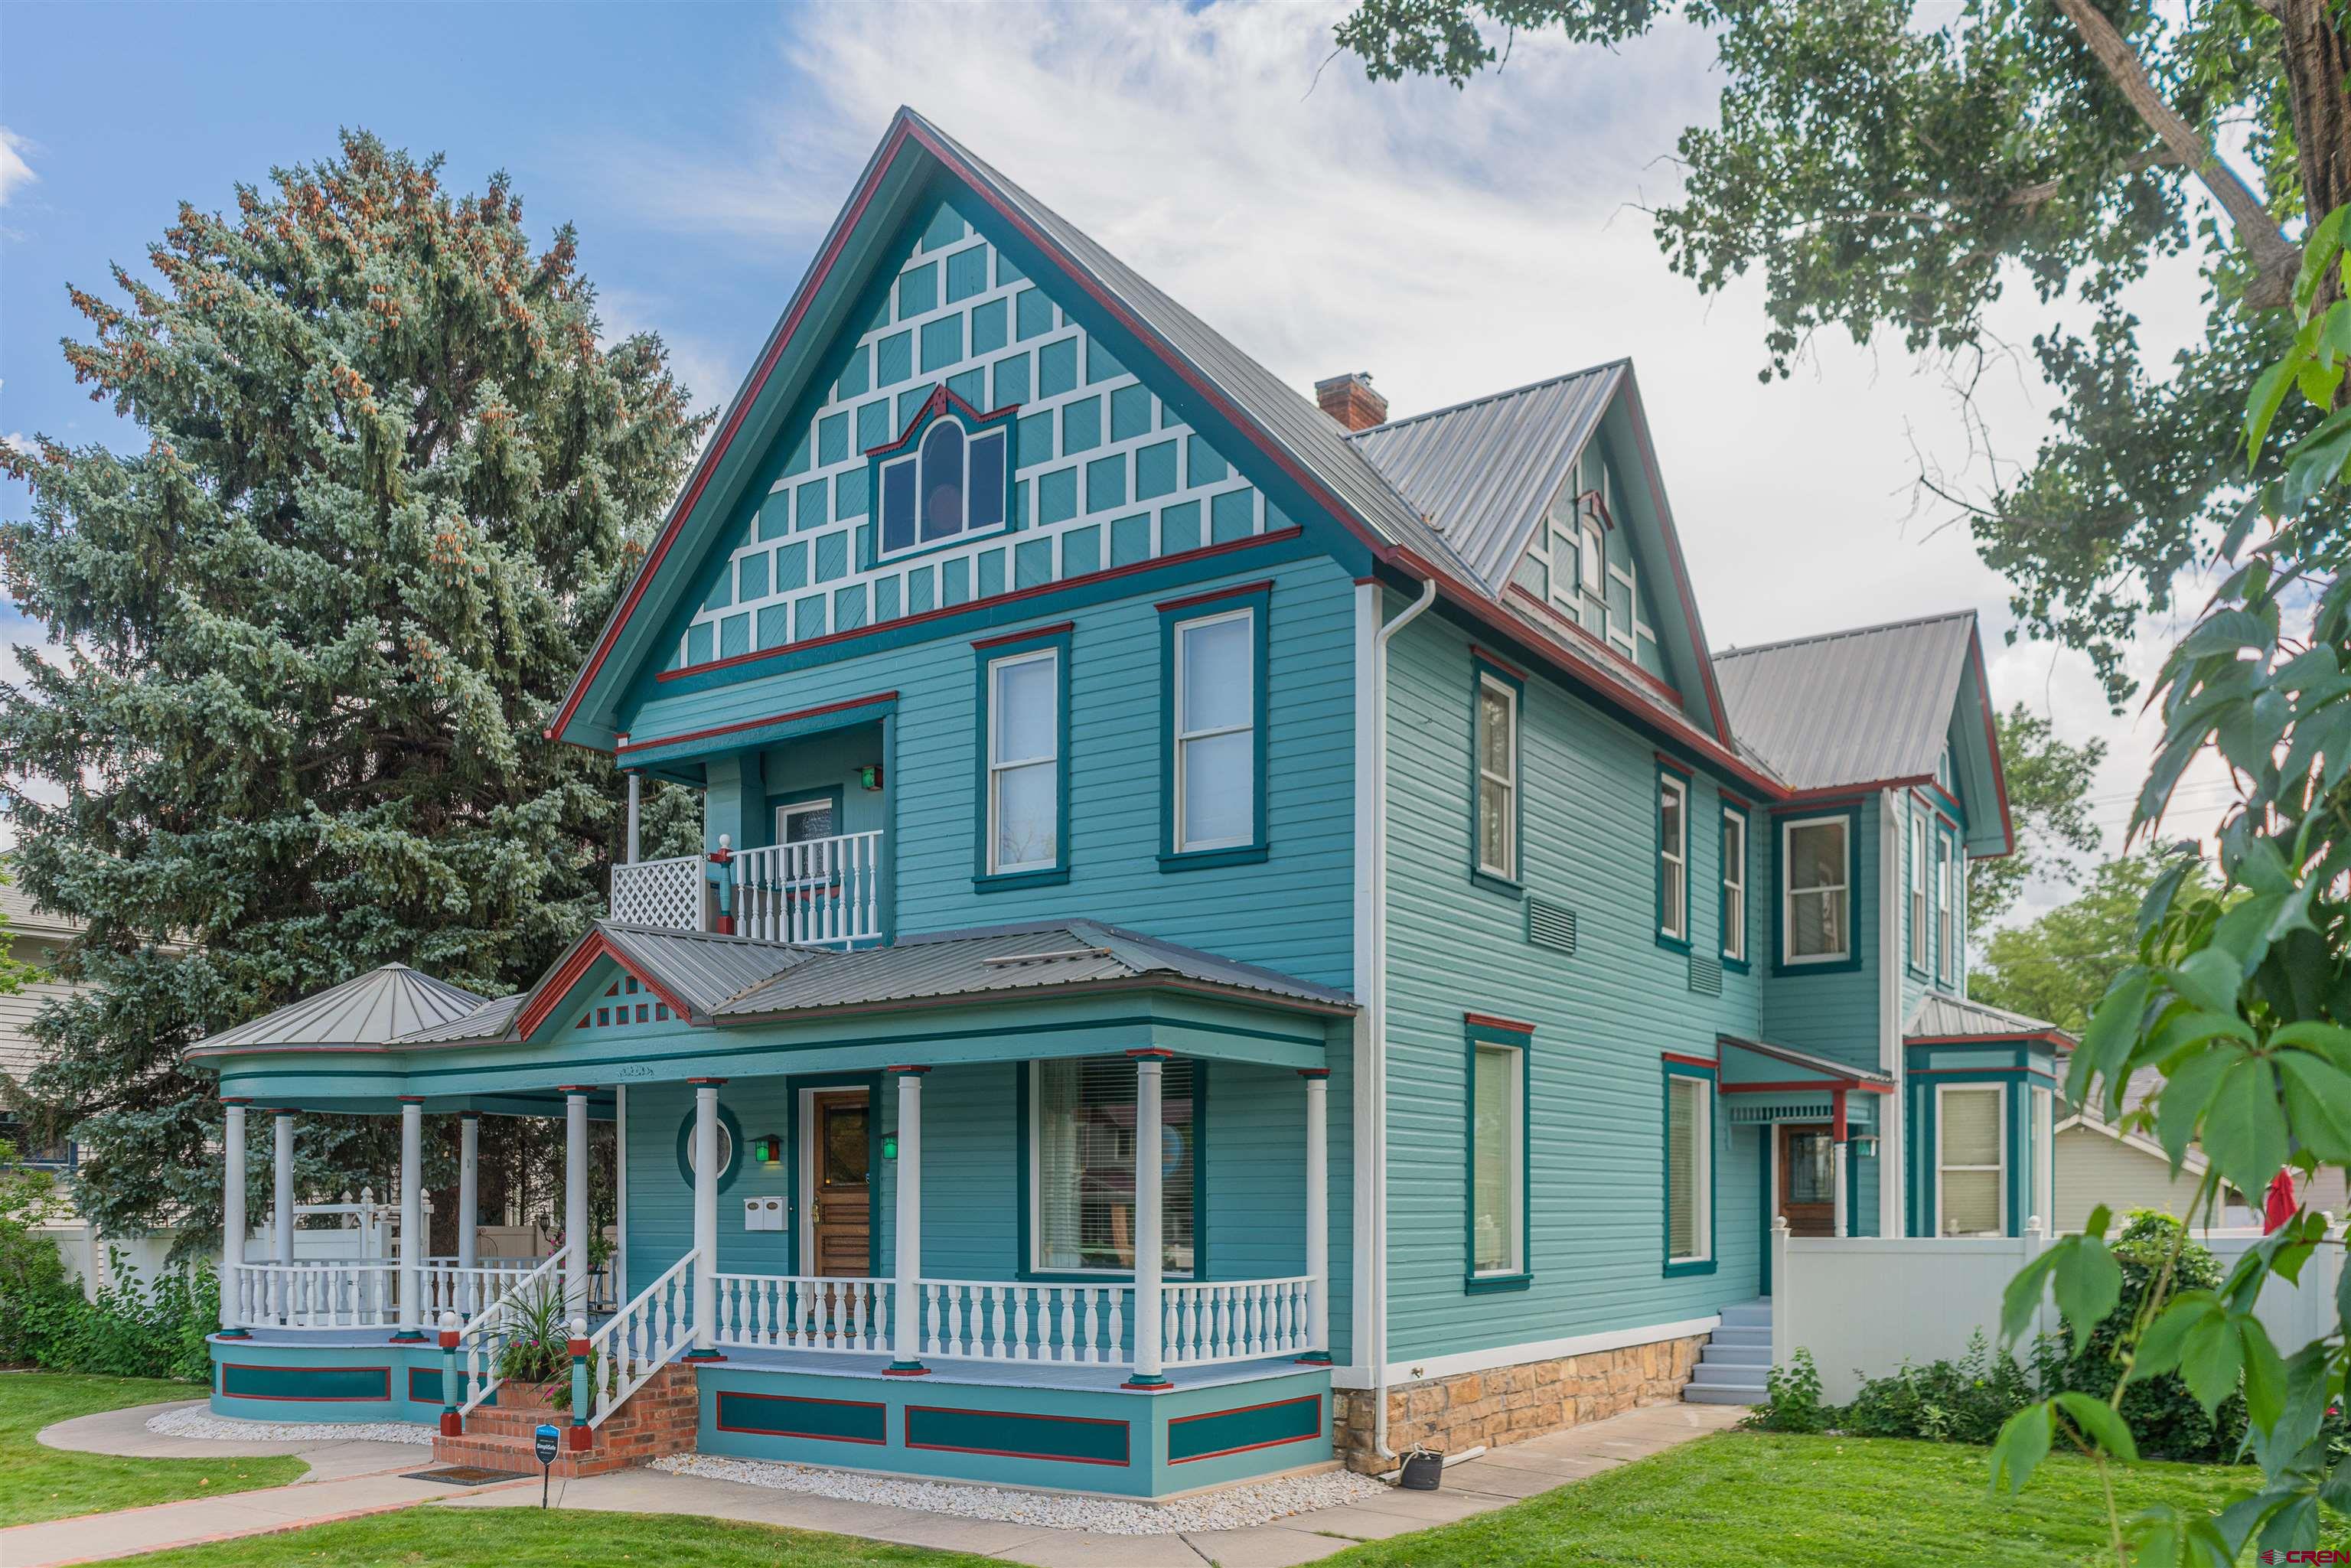 AN INCREDIBLE OPPORTUNITY AWAITS YOU TO OWN AN INVESTMENT PROPERTY WITH HISTORIC CHARM IN THE HEART OF DOWNTOWN MONTROSE,CO. Originally constructed in 1902 for J.V. and Emma Lathrop's family, This architecturally impressive home embodies a period of Montrose history. The Lathrop House was listed on the National Register of Historic Places in 1988 and is one of Montrose's most well recognized buildings on Main Street with its beautiful architecture and simple classic lines. This Victorian home was the most expensive built in the town around the time of construction and the largest home. Today, this home boasts 6 bedrooms and 5 baths total, with several living spaces, an office, a formal dining room, chef's kitchen, 2 built in fireplaces and a beautiful wrap-around porch designed by Emma Lathrop herself. It is currently split into 3 different apartments with separate entrances but can easily be utilized as a Bed & Breakfast as it was previously. The attention to detail from the columns and scrollwork to the wallpaper and stained-glass windows throughout in this home are a must see! Schedule a tour today! To add to House comes fully furnished with the exception of personal items. A list of these items to be provided by Seller before closing.